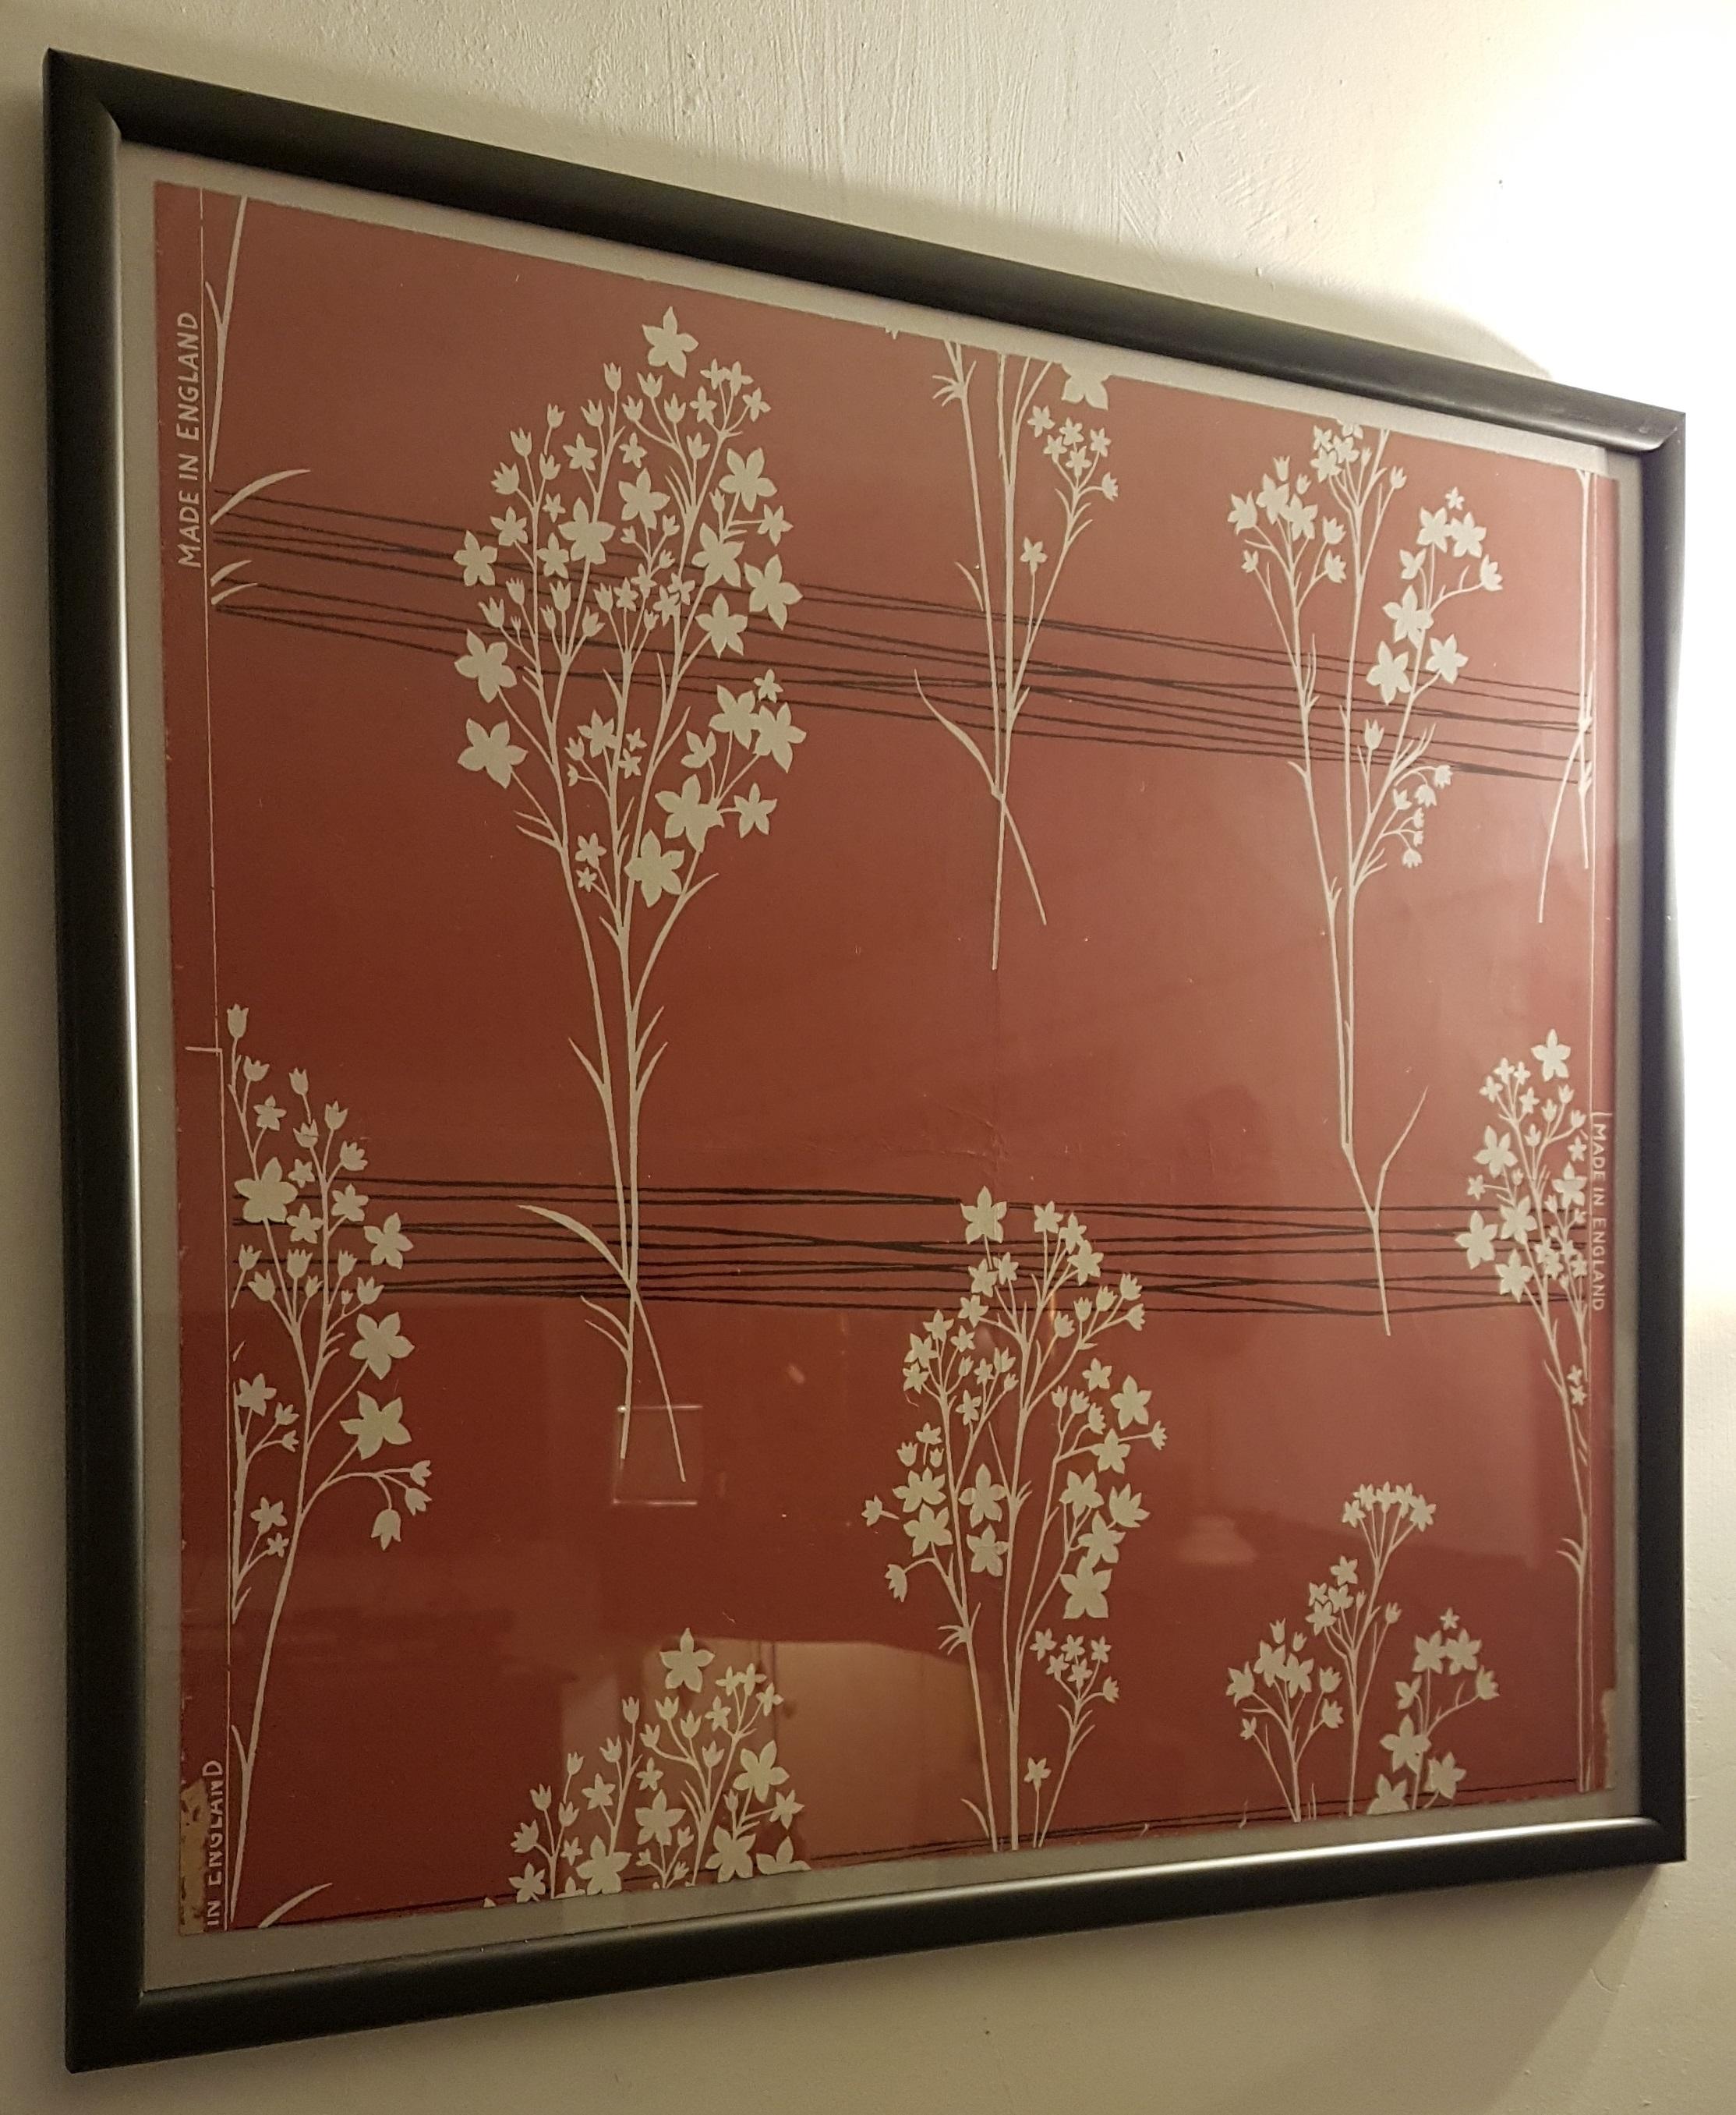 This is an original wallpaper sample from 1955 called Polonaise with unknown designer for Palladio which later became Sanderson. We have had it freshly framed in an elegant rounded matt black frame with glass front and ivory white framing card, to